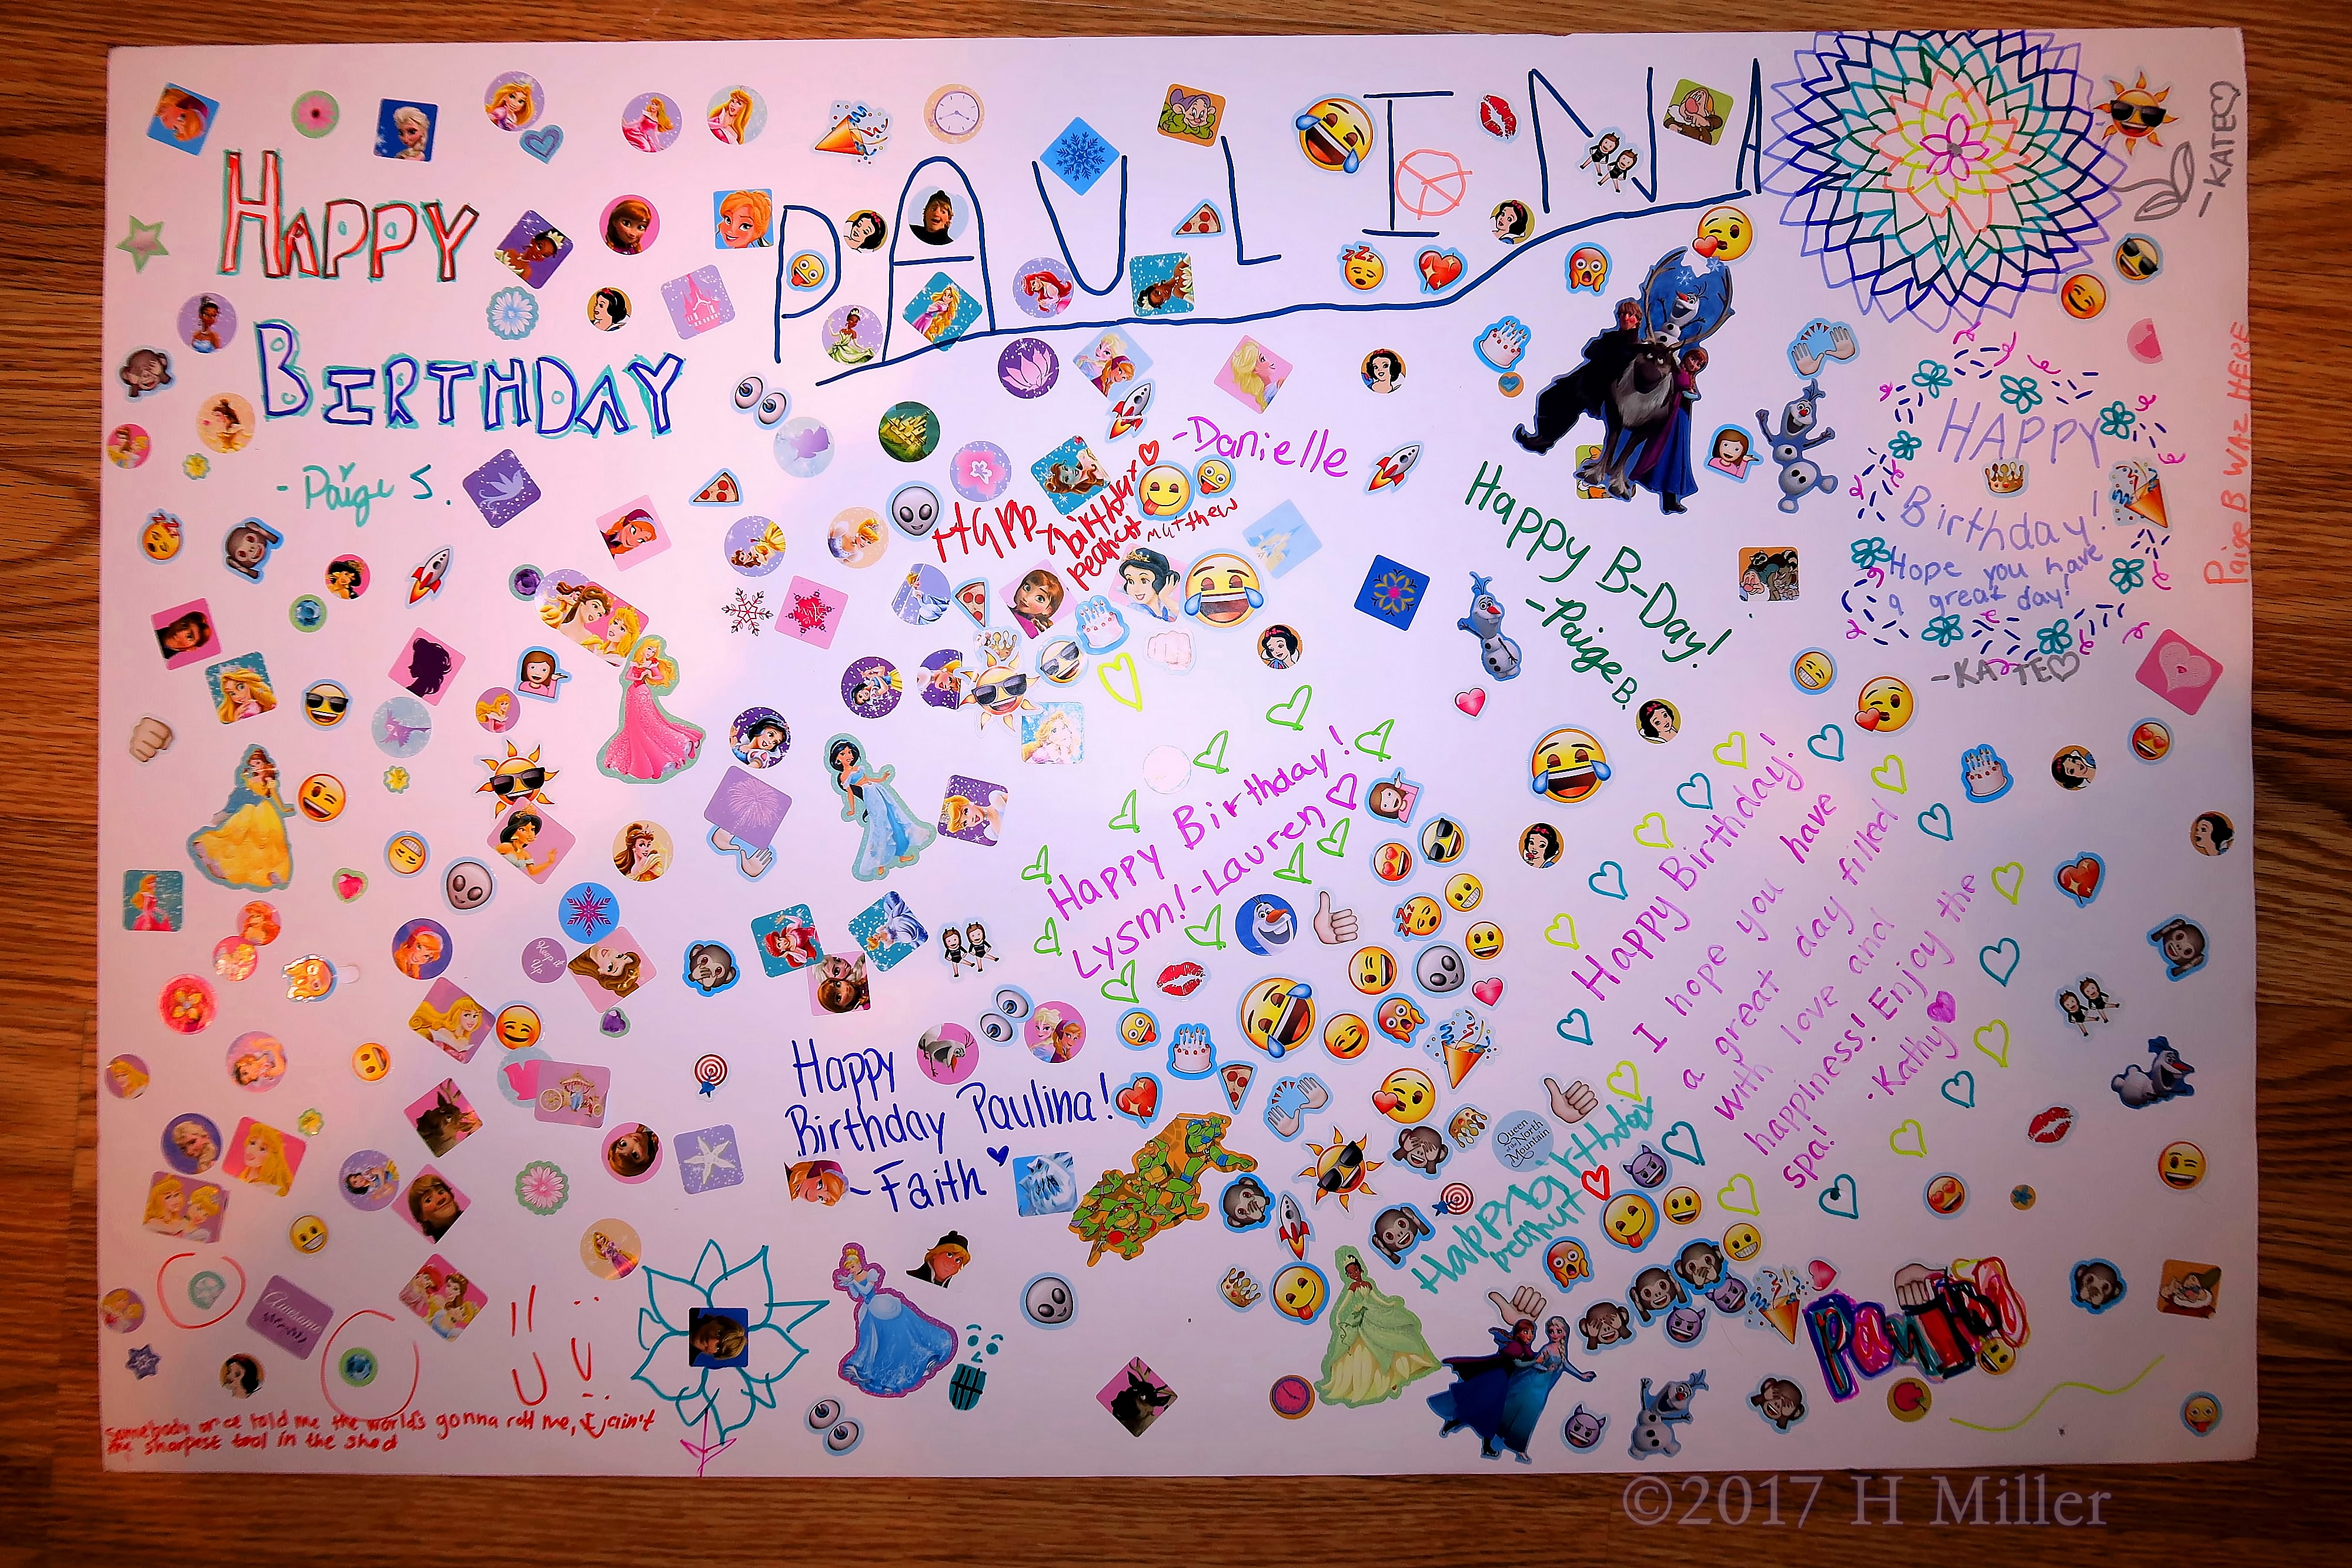 A Cute Spa Birthday Card For Paulina Made By Her Friends! 